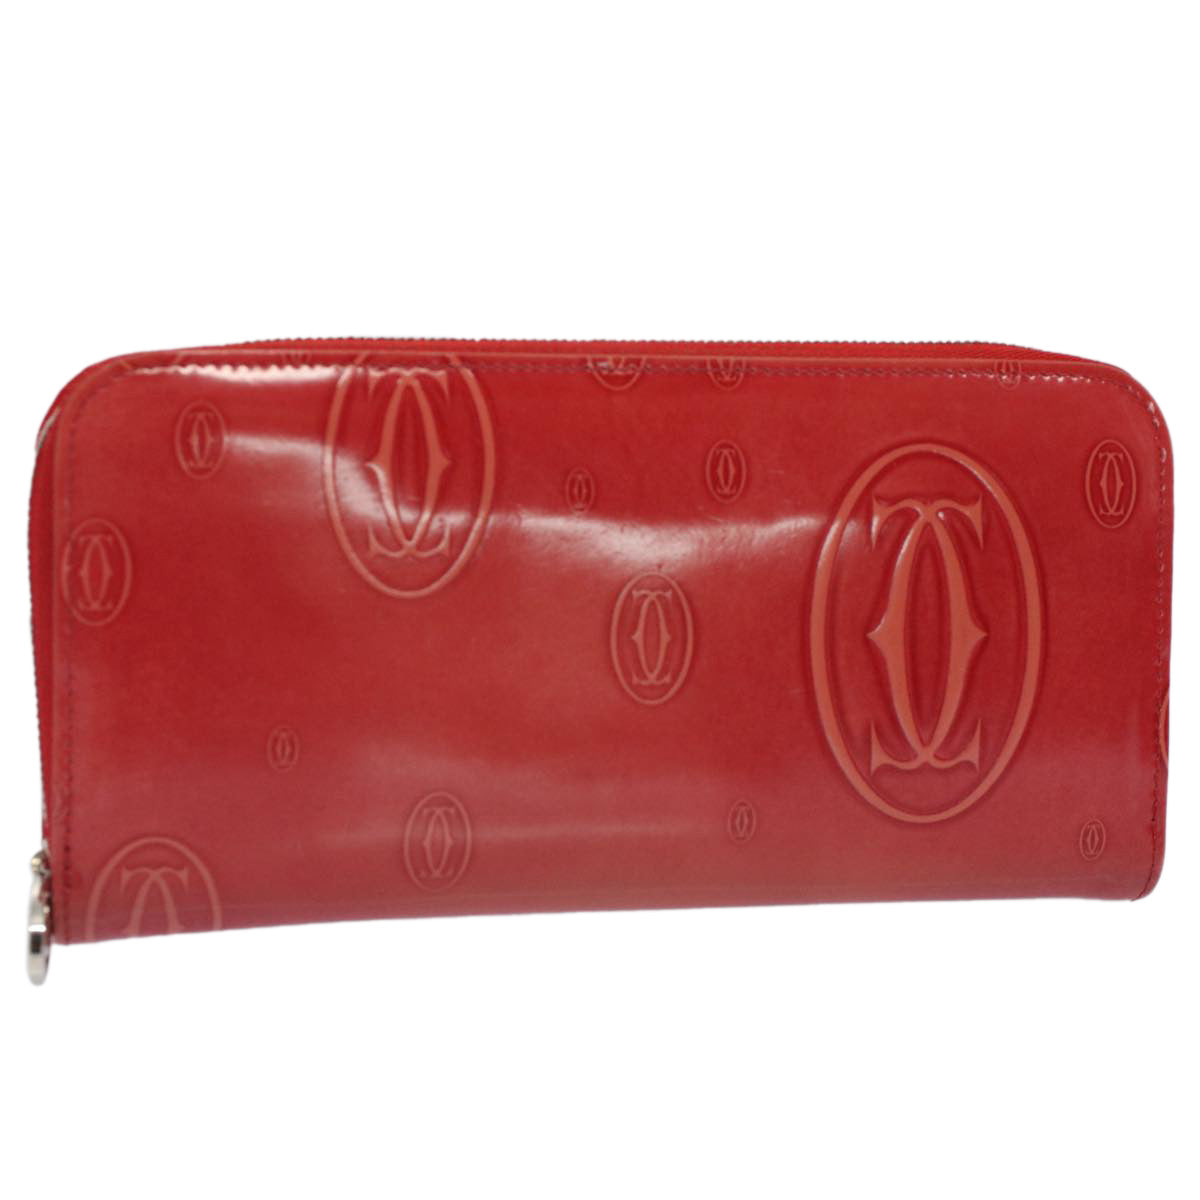 CARTIER Happy Birthday Wallet Patent leather Red Auth am4918